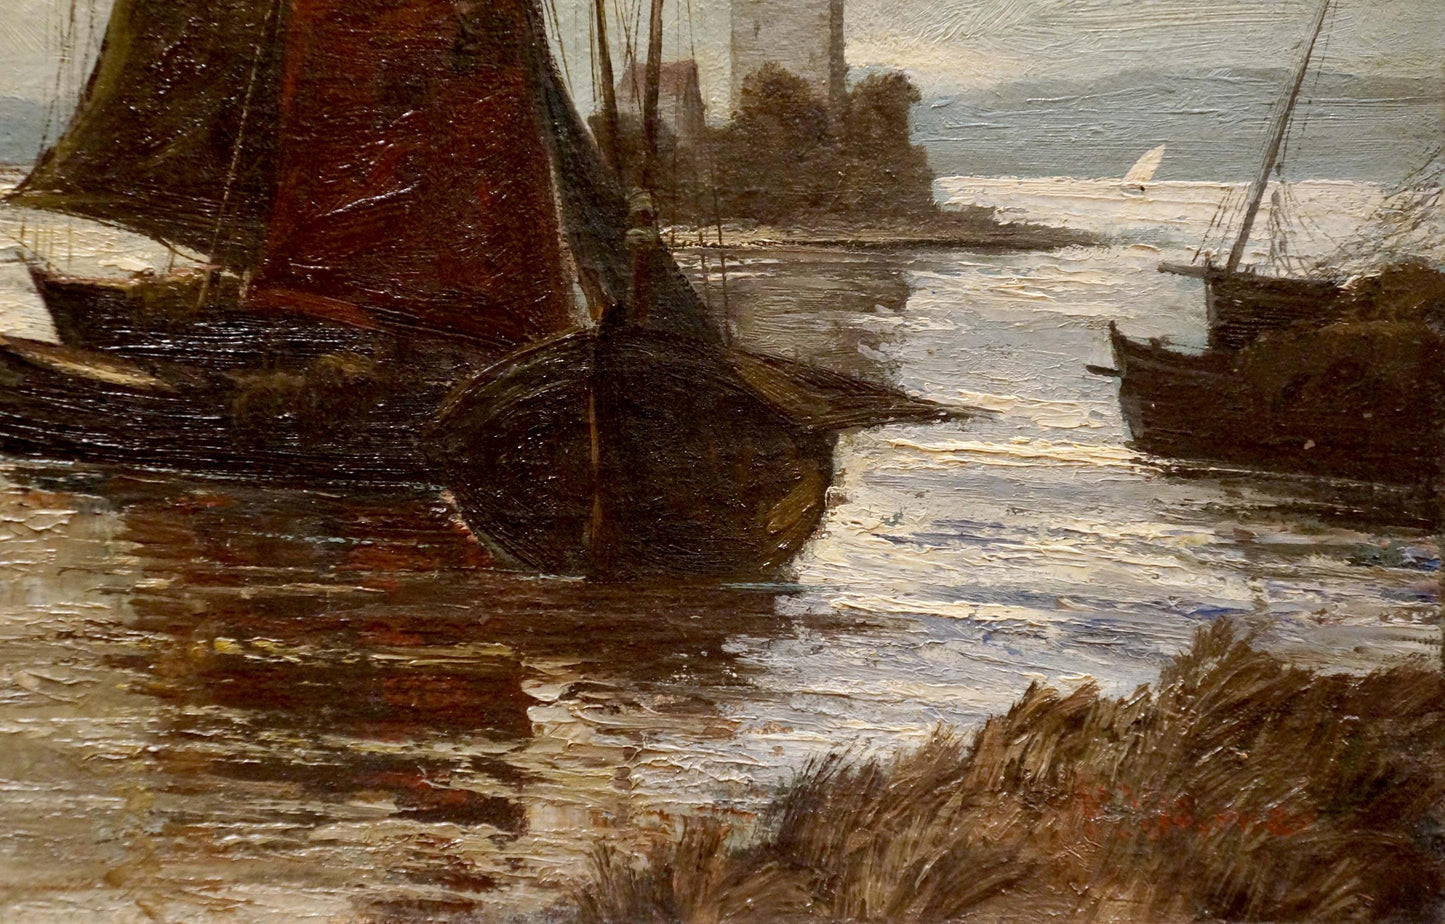 Oil painting Fleet of ships Woseker A.